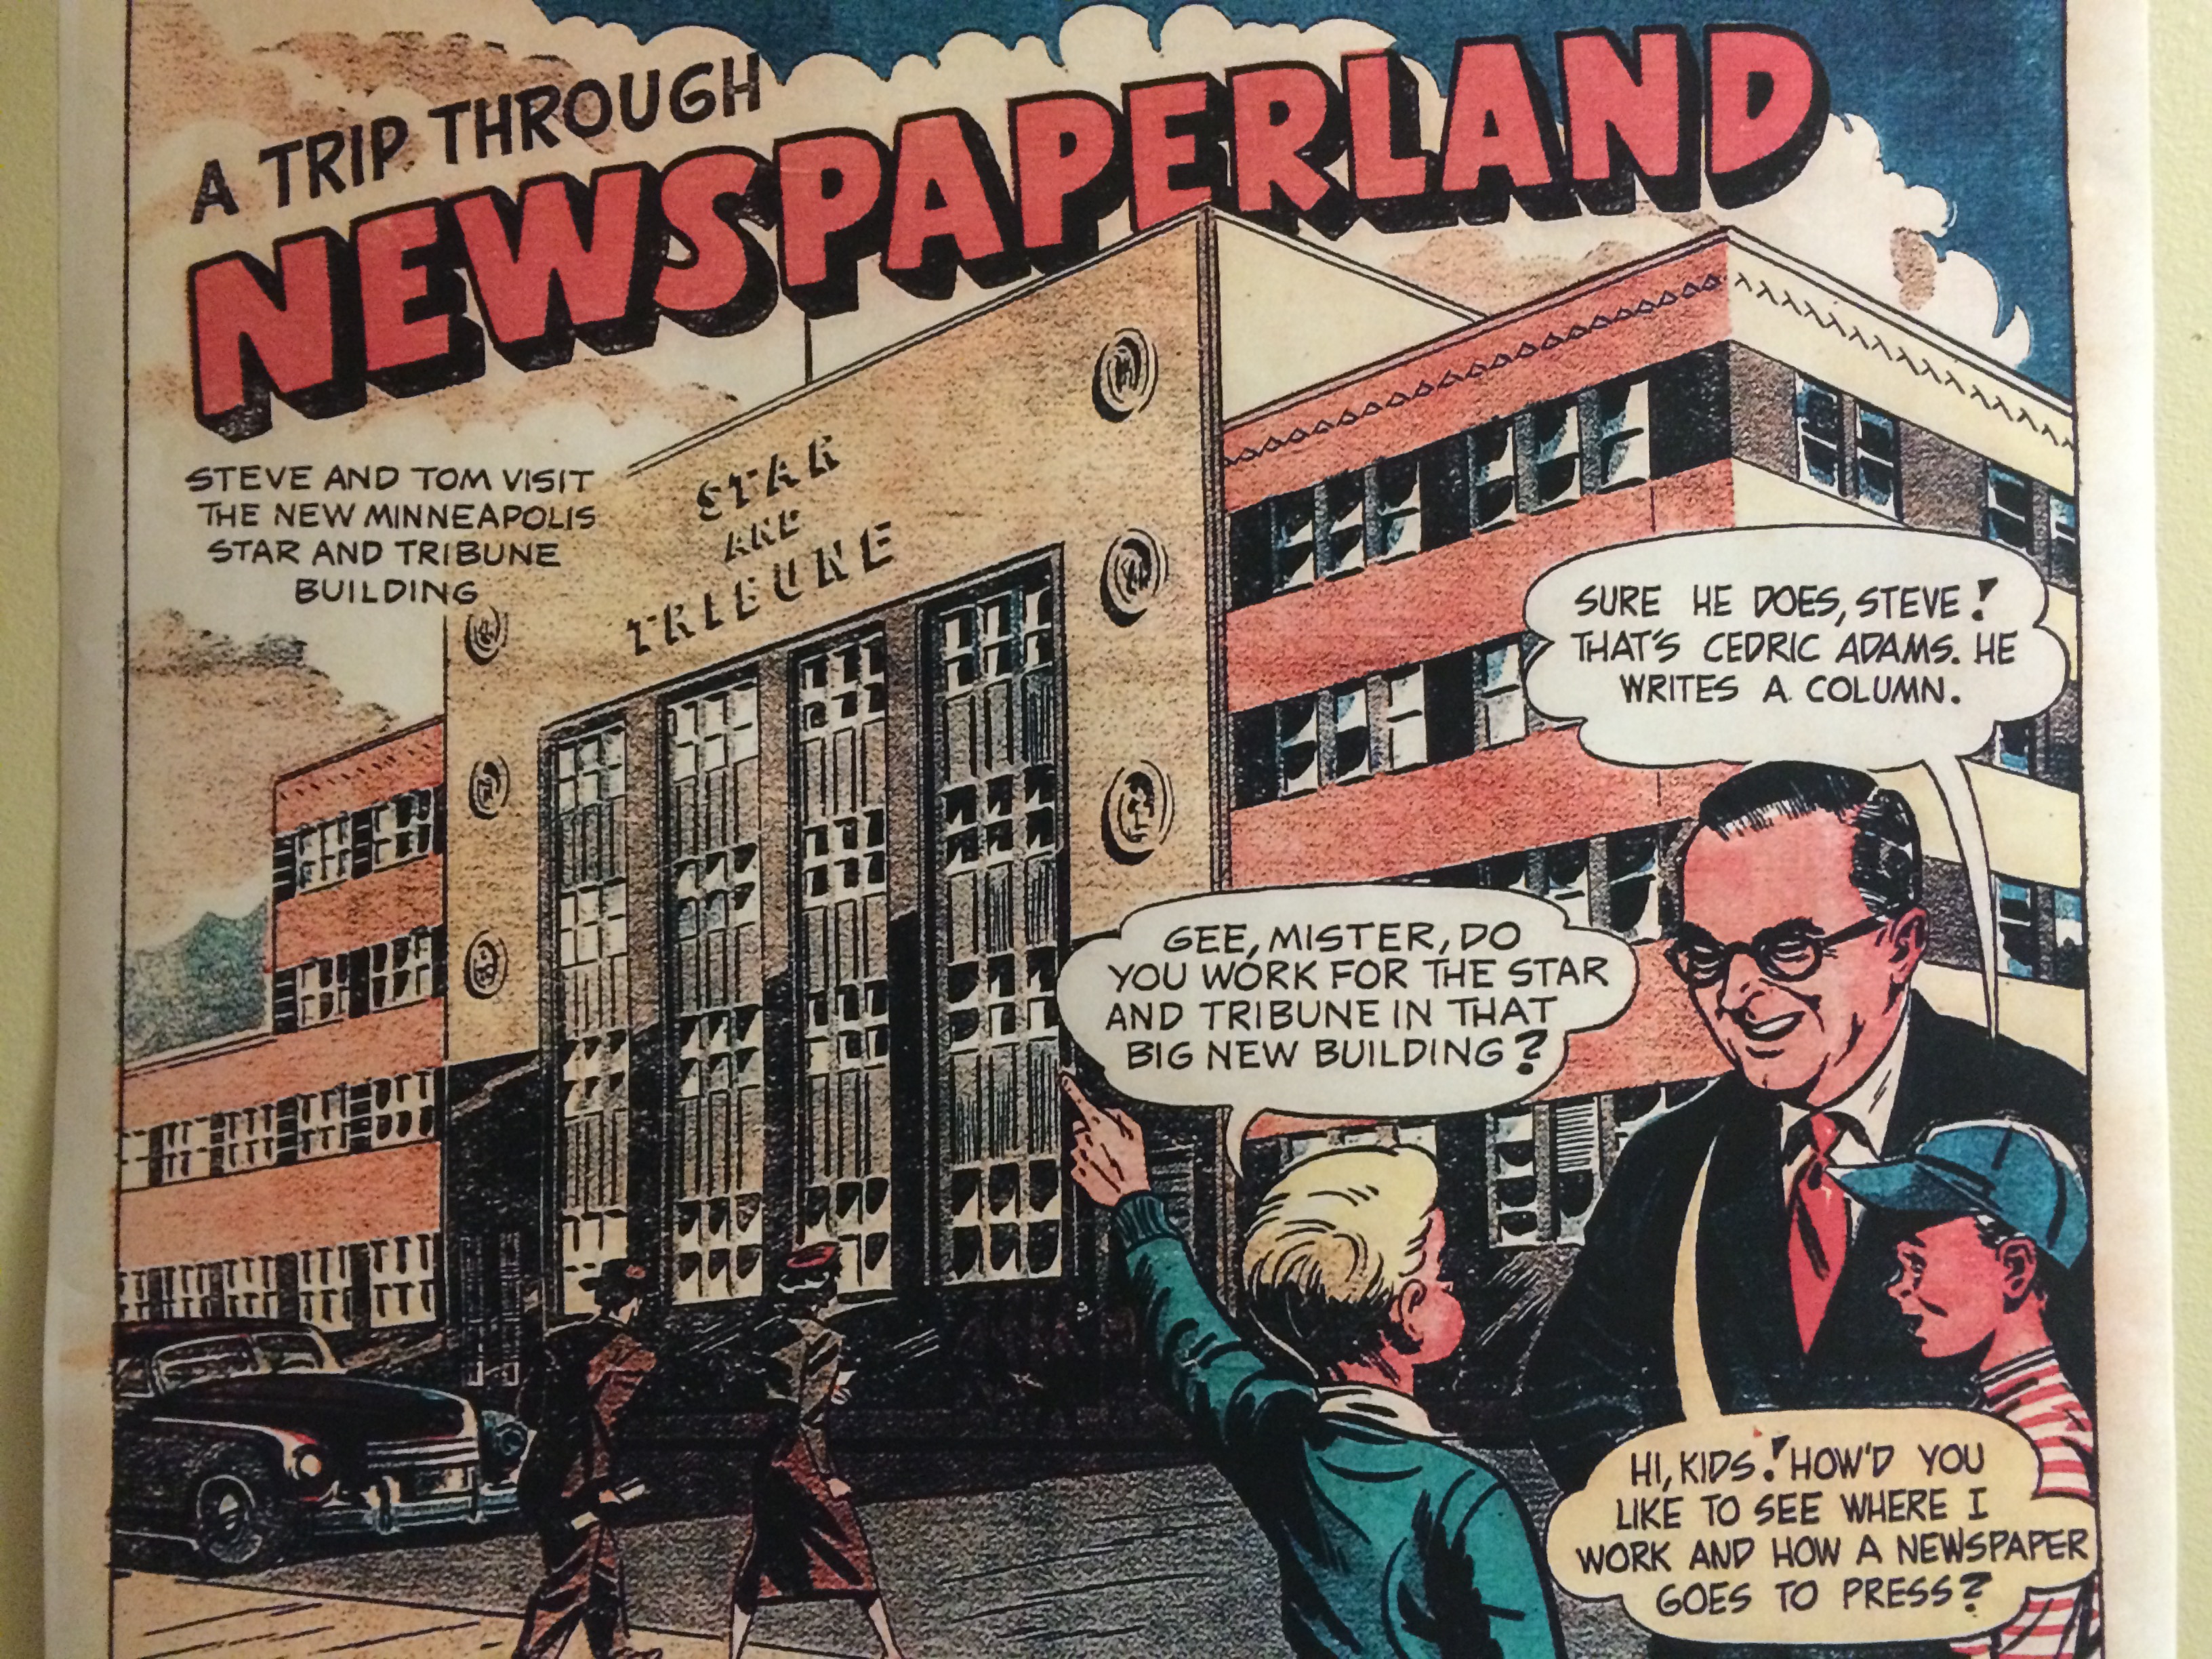 star tribune comic from building opening